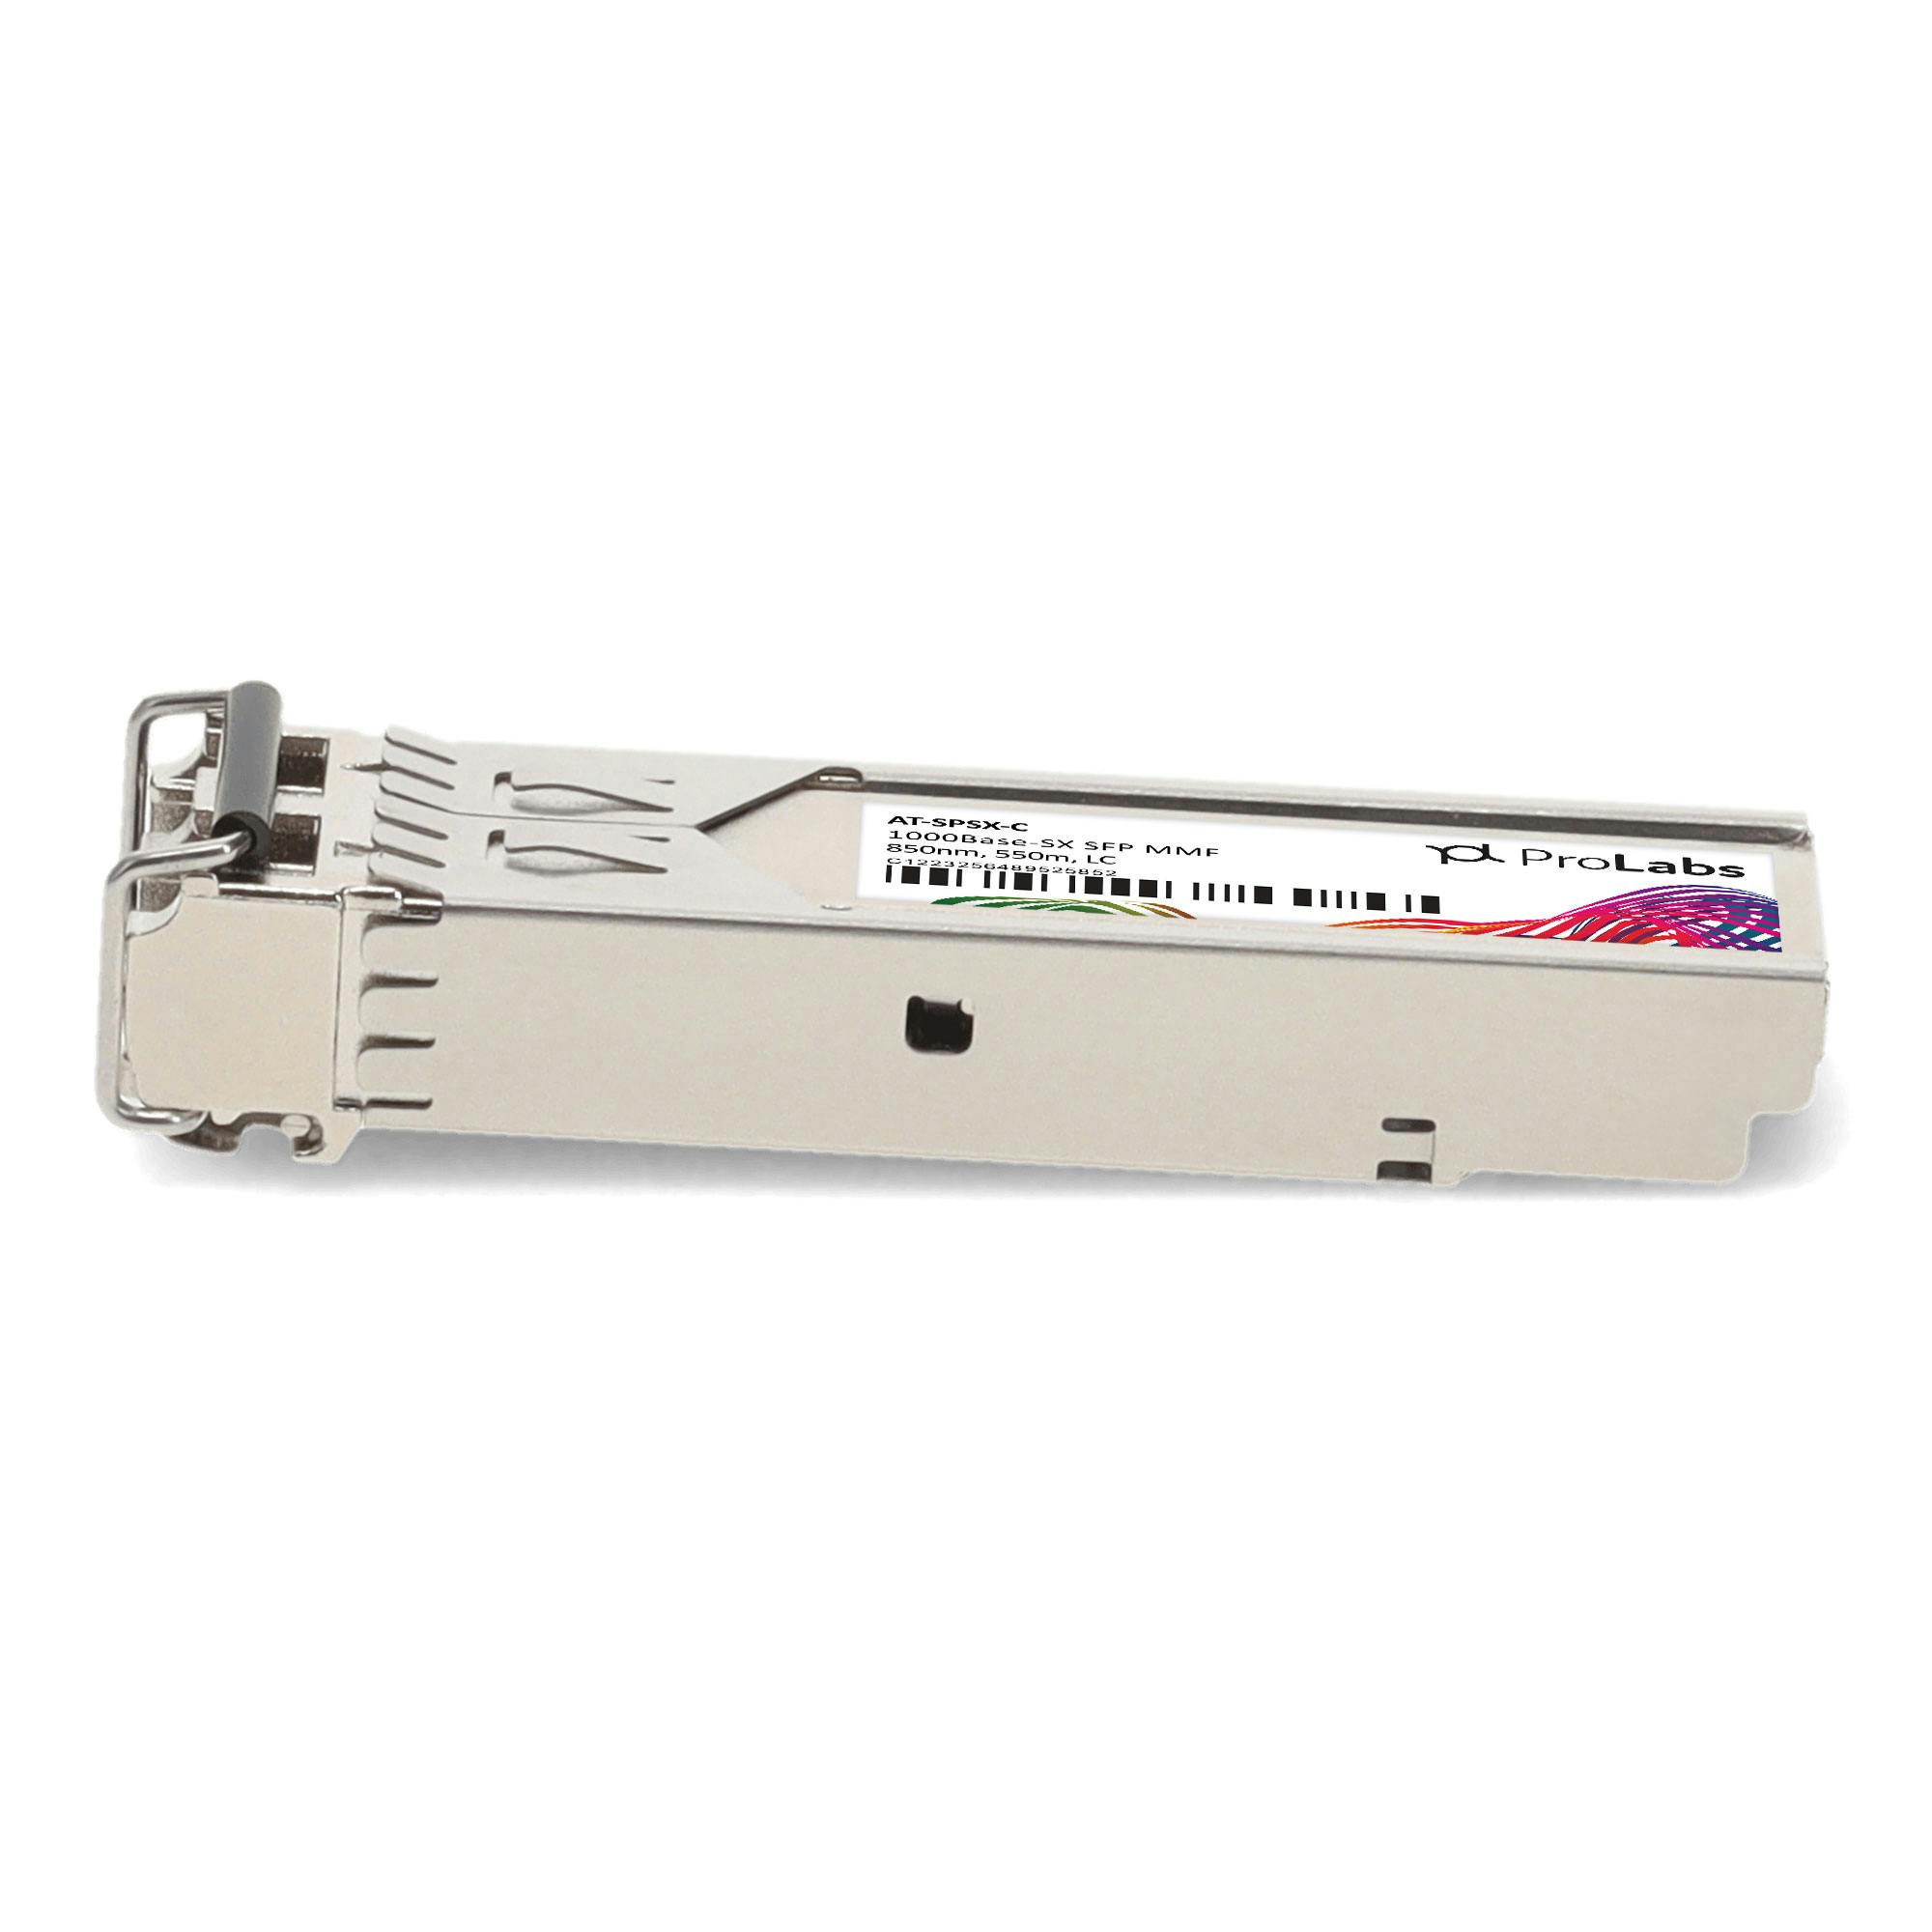 at-SPSX AXIOM MEMORY SOLUTION,LC 1000BASE-SX SFP Transceiver for Allied Telesis at-SPSX-AX